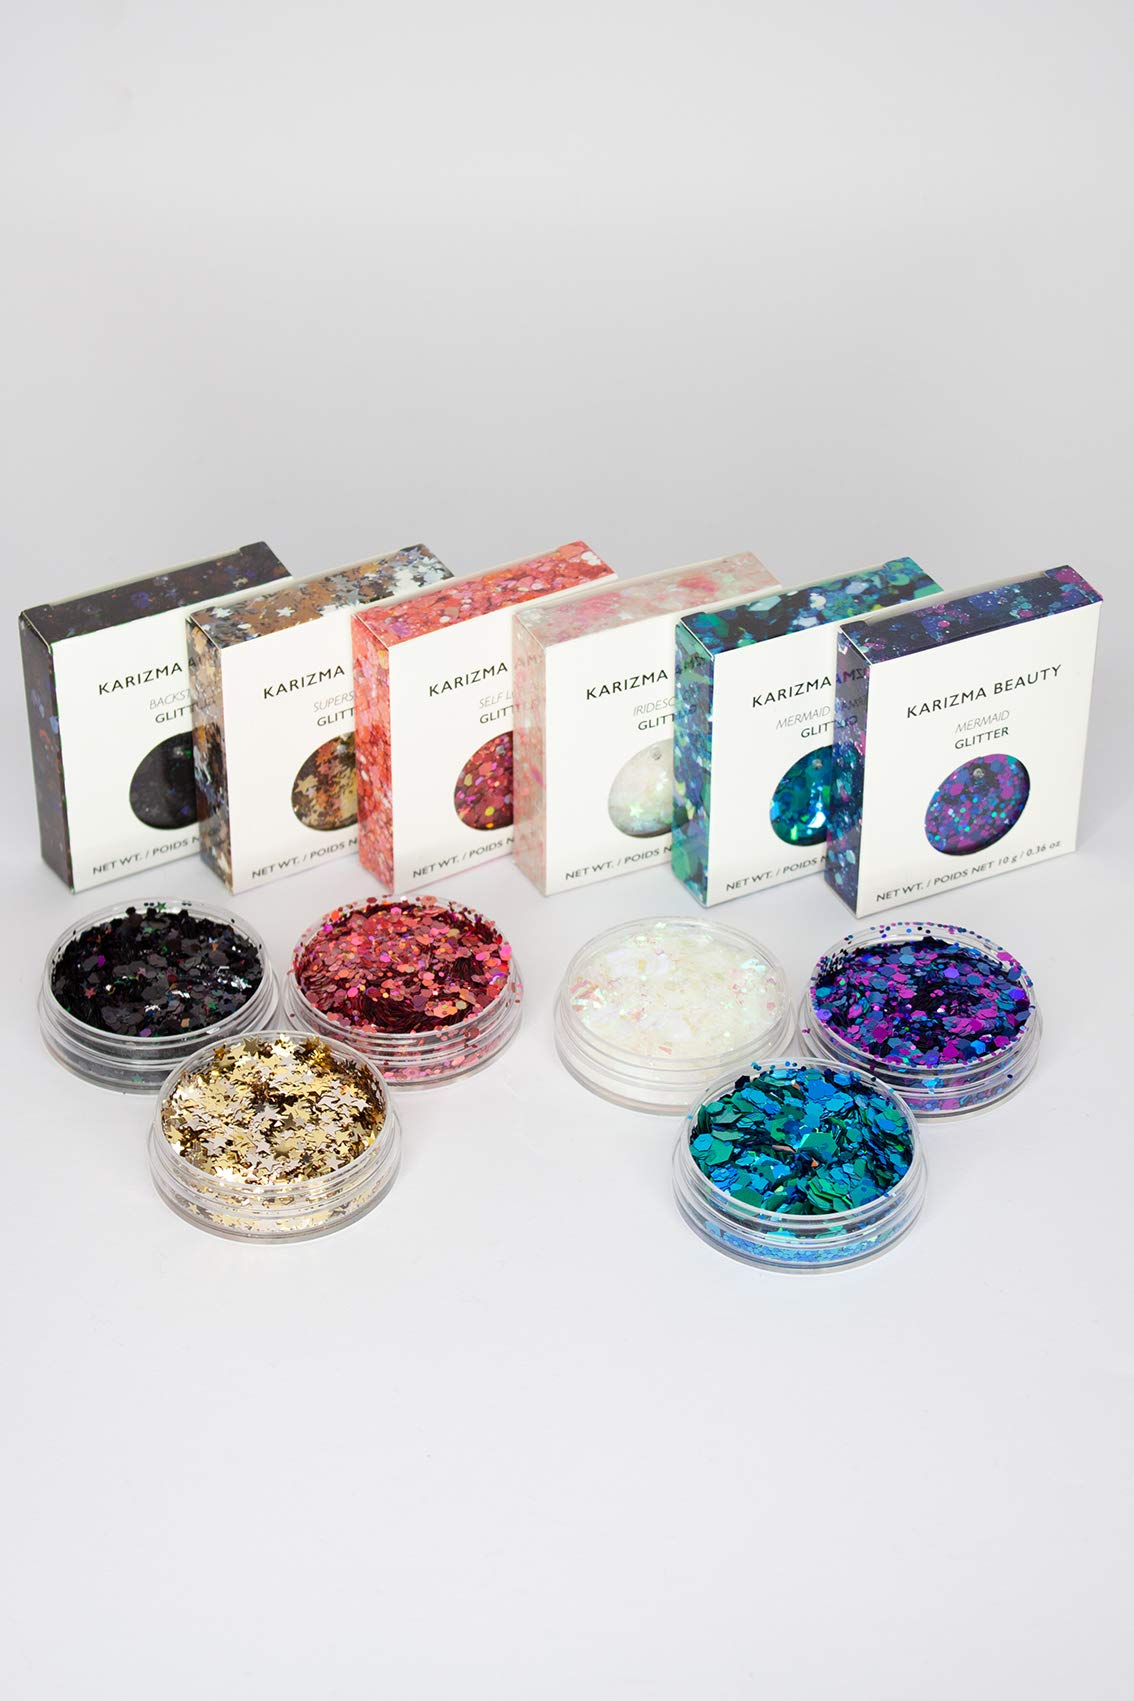 KARIZMA Kiss My Bass! 6X 10g Chunky Face Glitter, Hair Glitter, Eye Glitter and Body Glitter for Women and Men. Rave Glitter, Festival Accessories and Cosmetic Glitter Makeup. Loose Glitter Pots